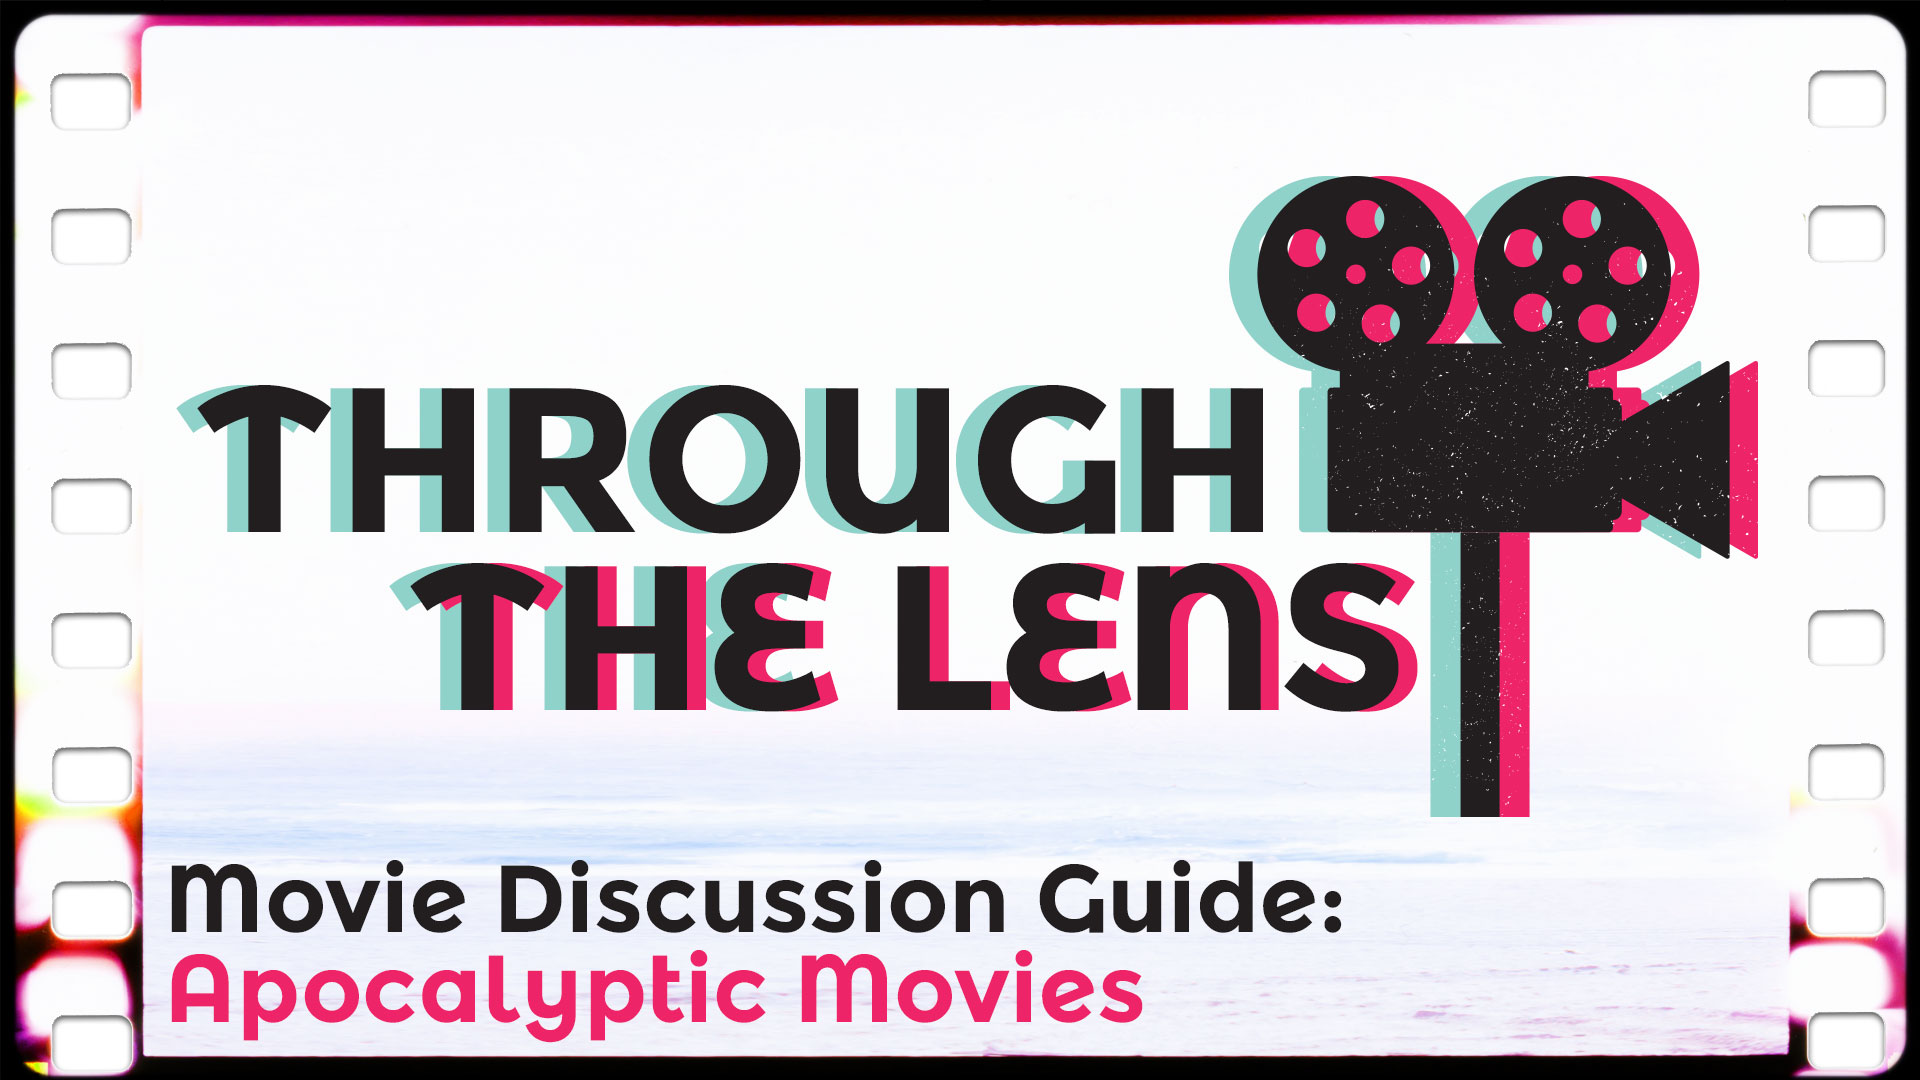 Movie Discussion Guide: Apocalyptic Movies